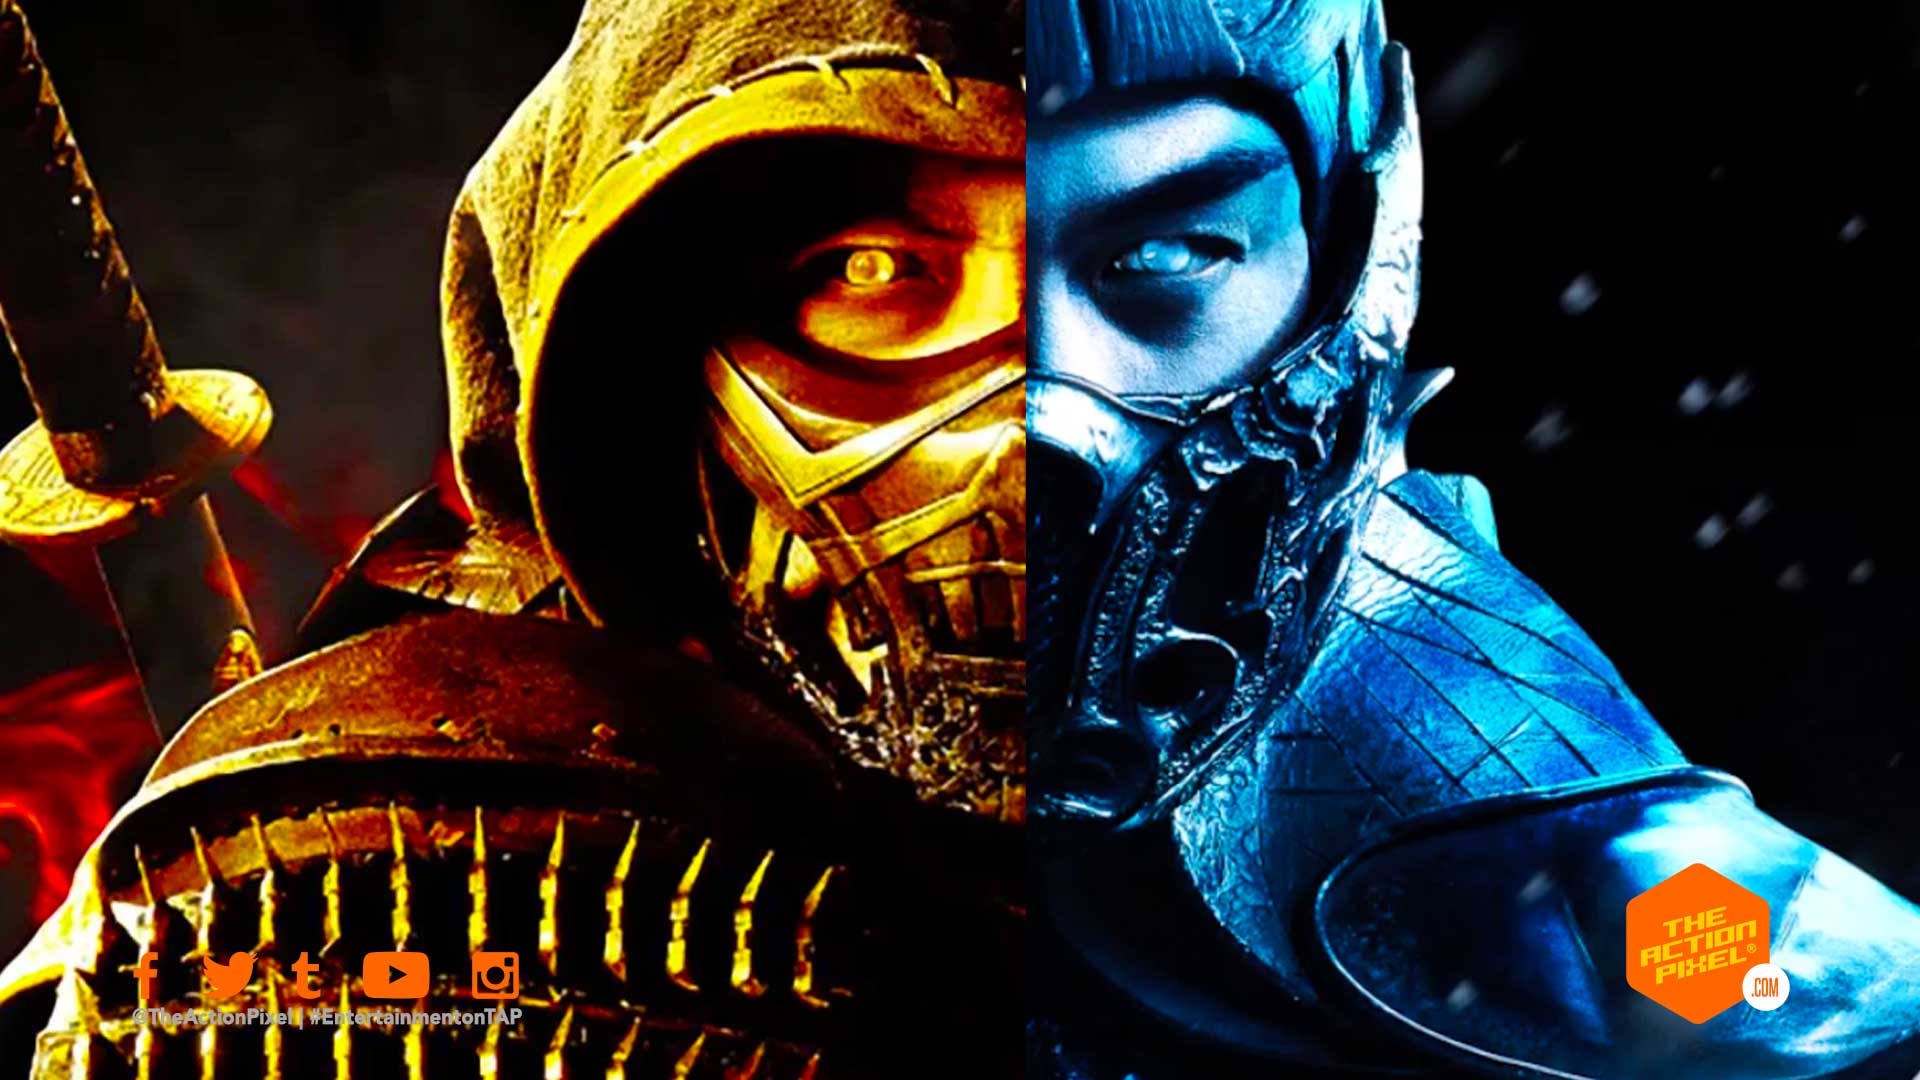 Mortal Kombat Movie Official Poster Wallpapers